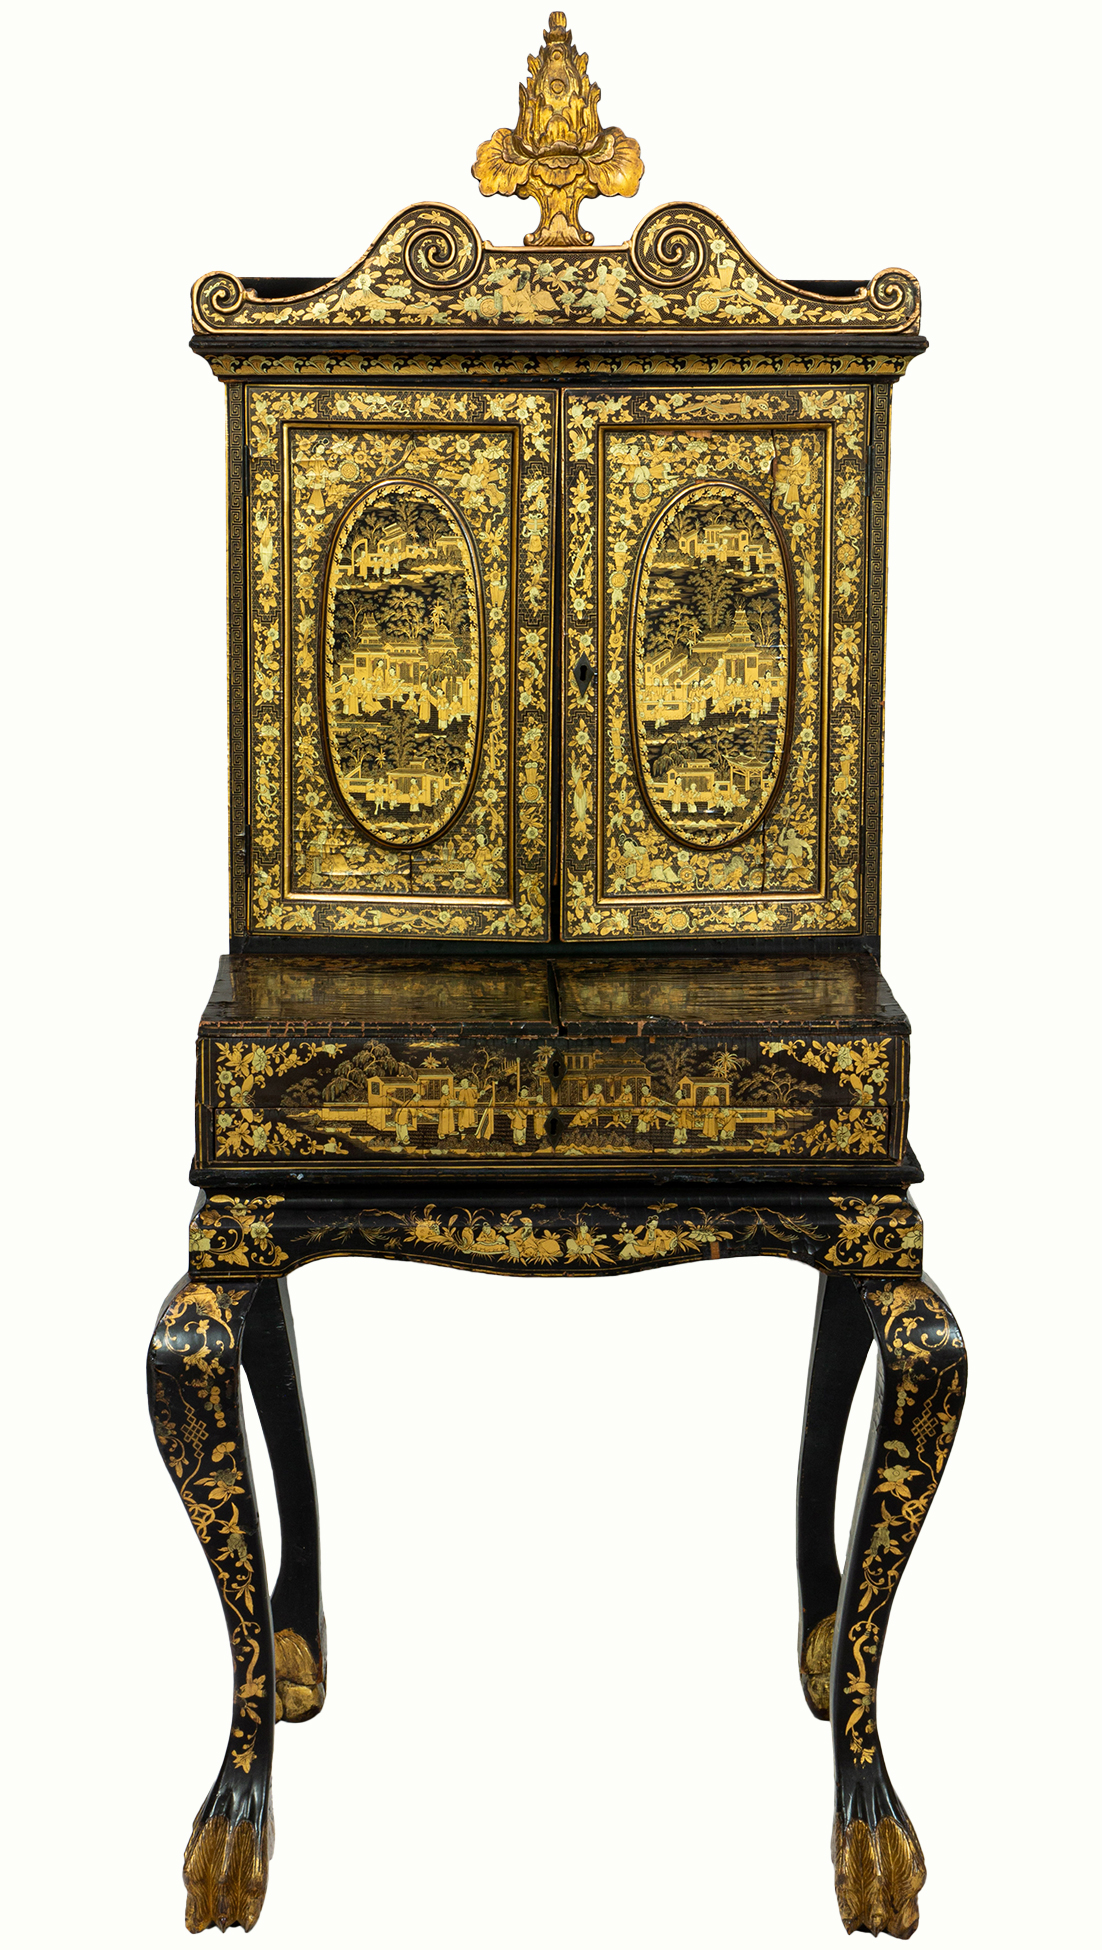 A Chinese export gilt lacquered desk.